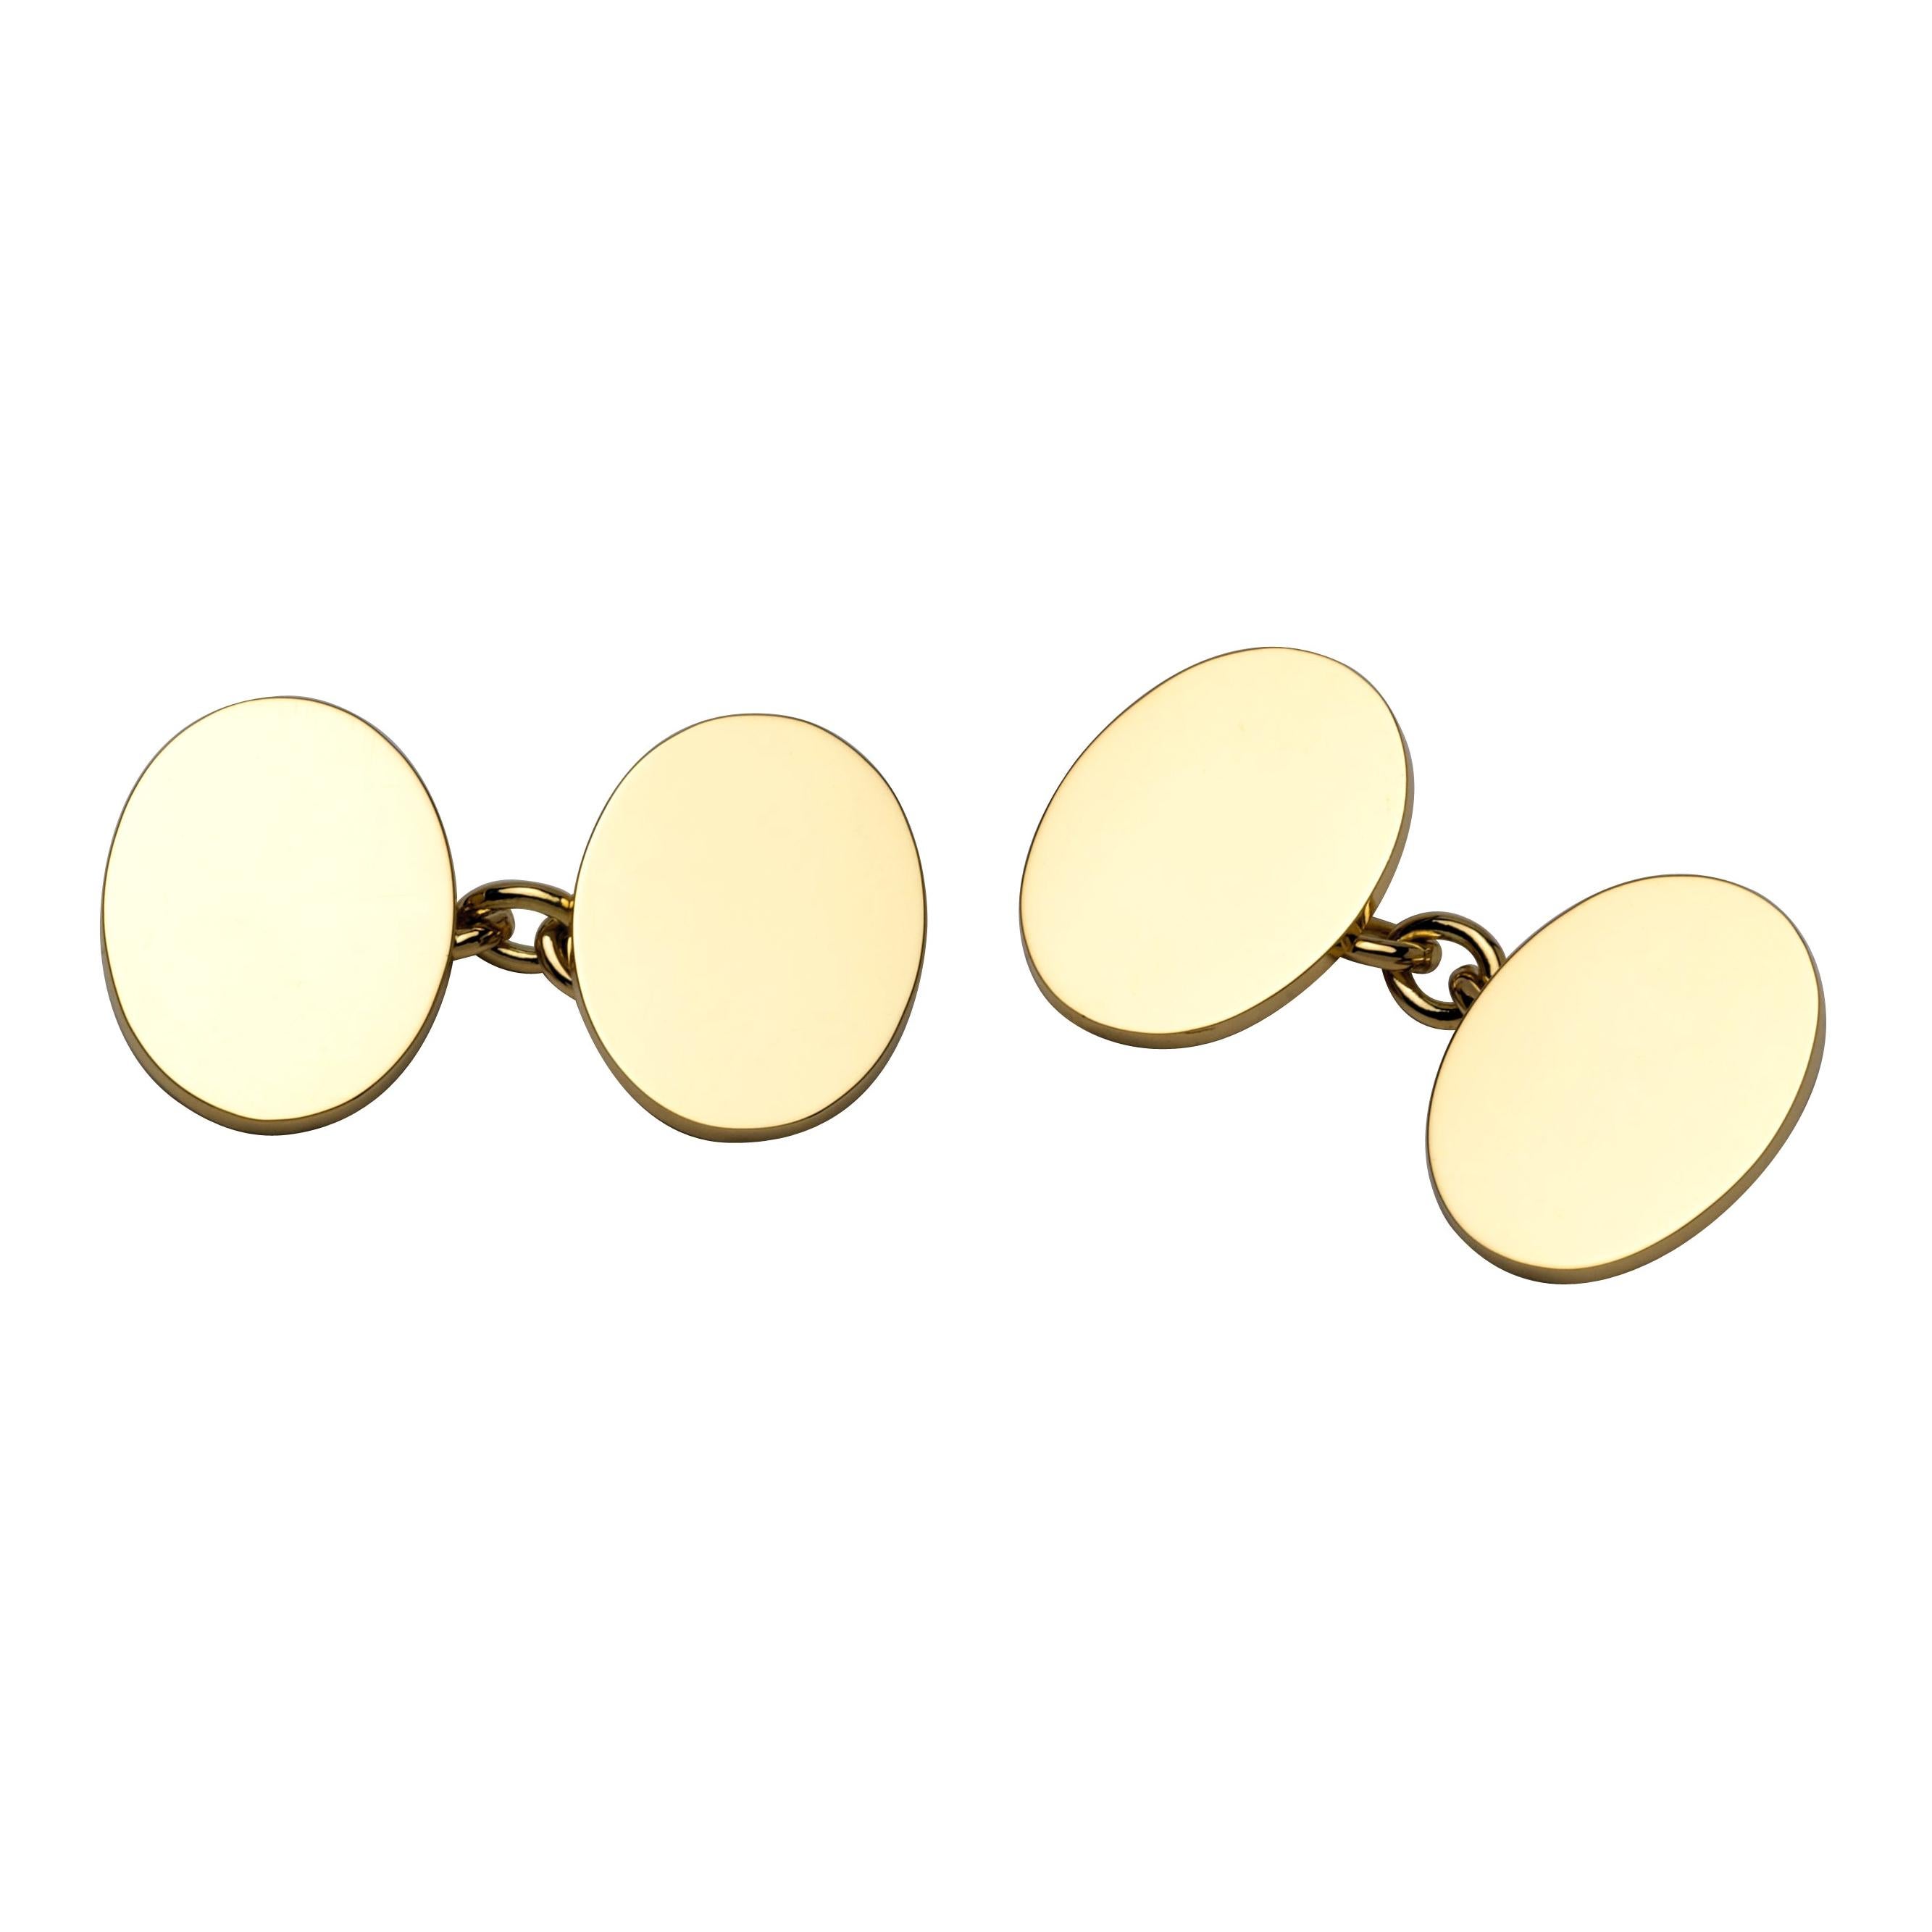 Deakin & Francis 18ct Gold Plain Oval Cufflinks With Chain Link For Sale